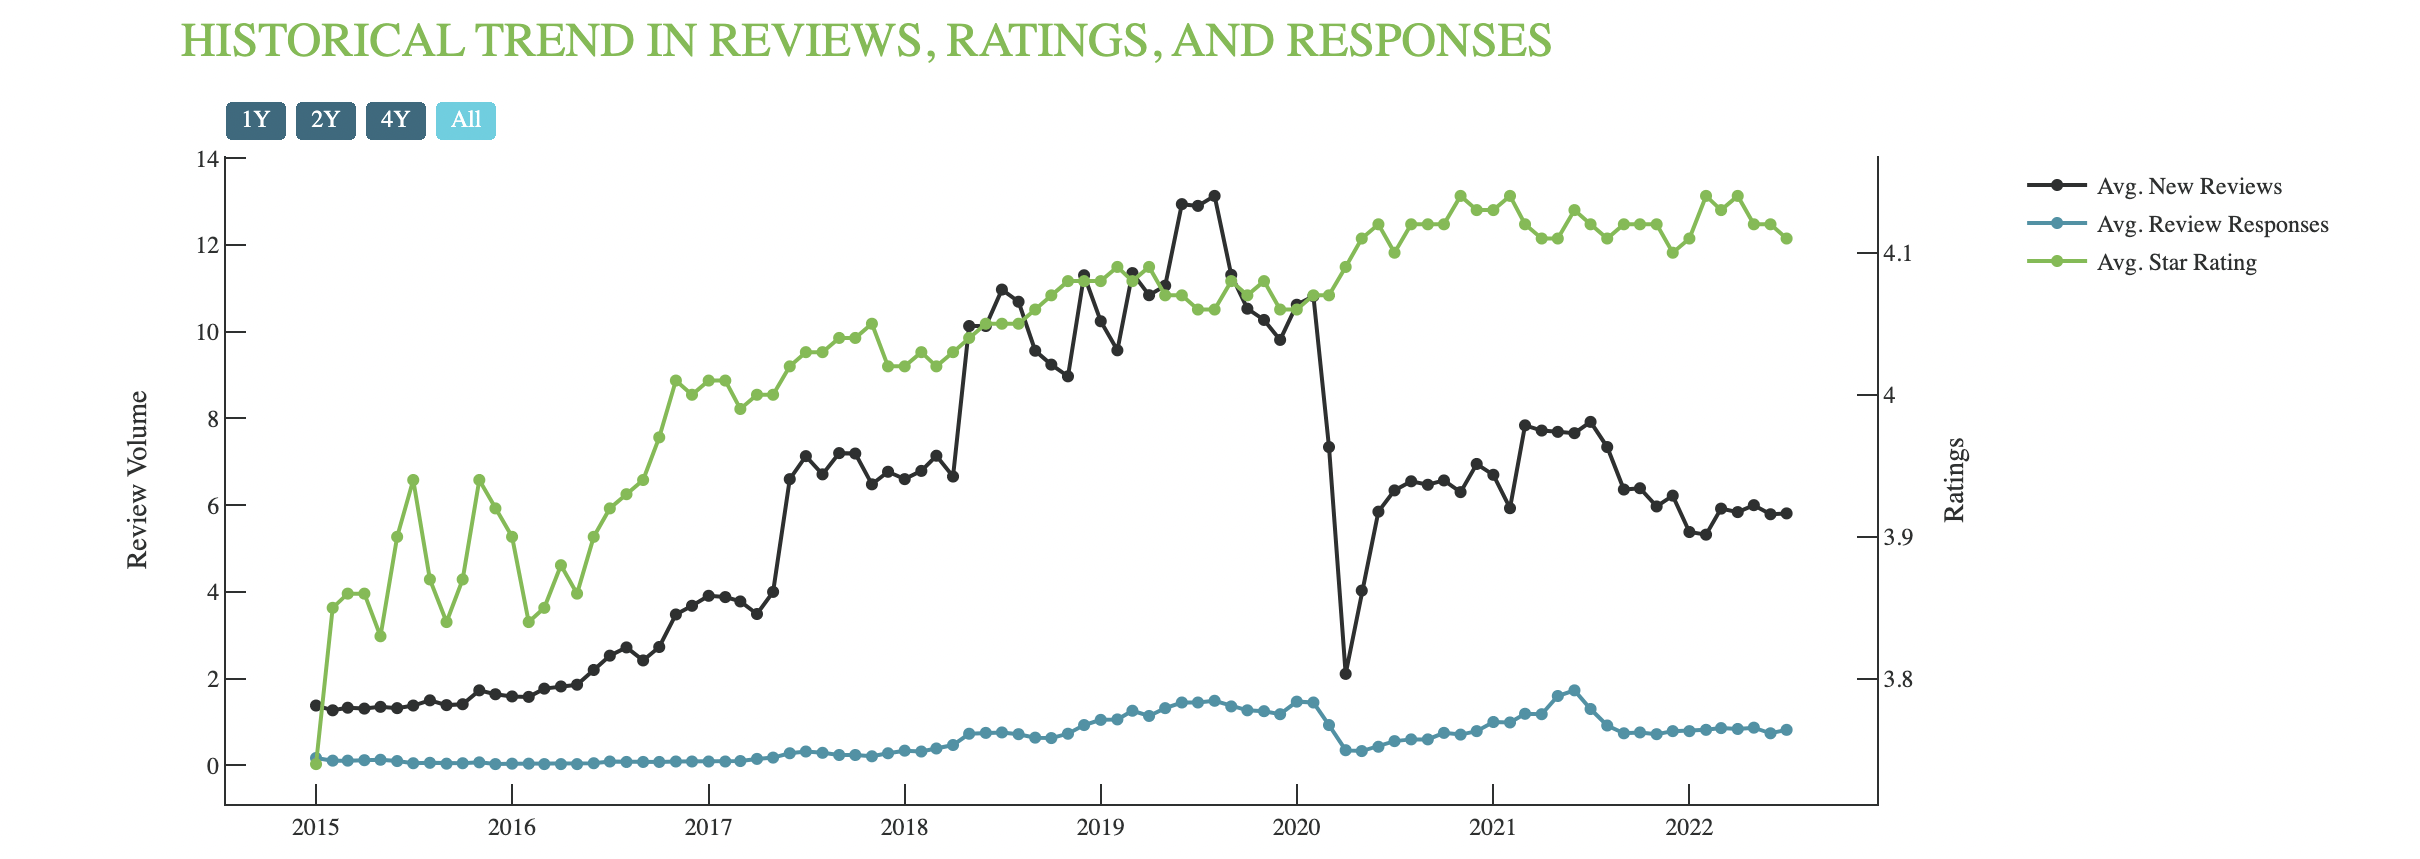 A graph showing historical data on reviews, review responses, and average star ratings